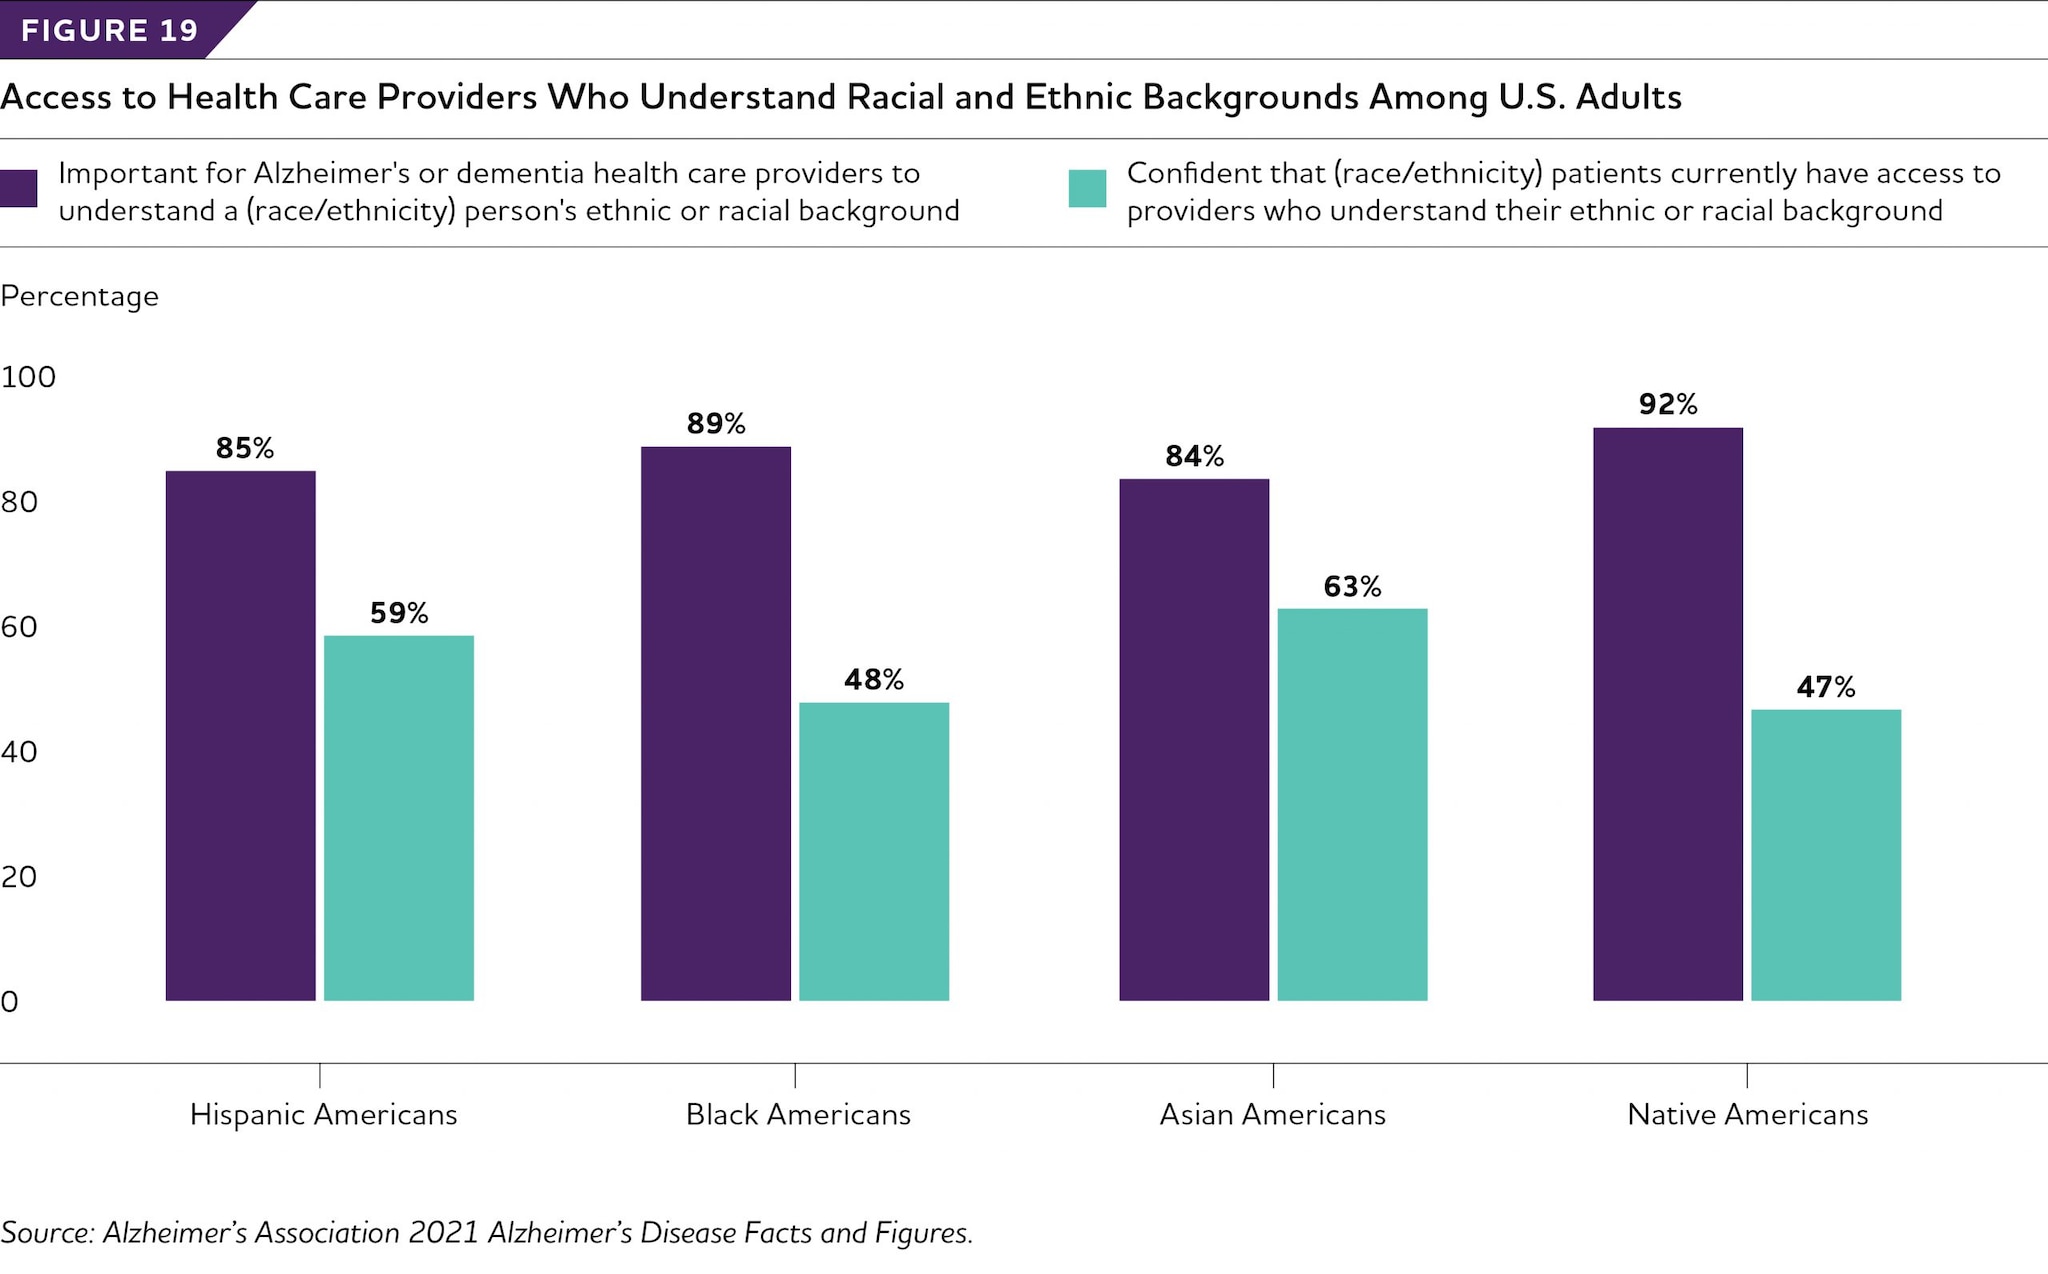 Access to HCPs who understand racial and ethnic backgrounds among U.S. adults